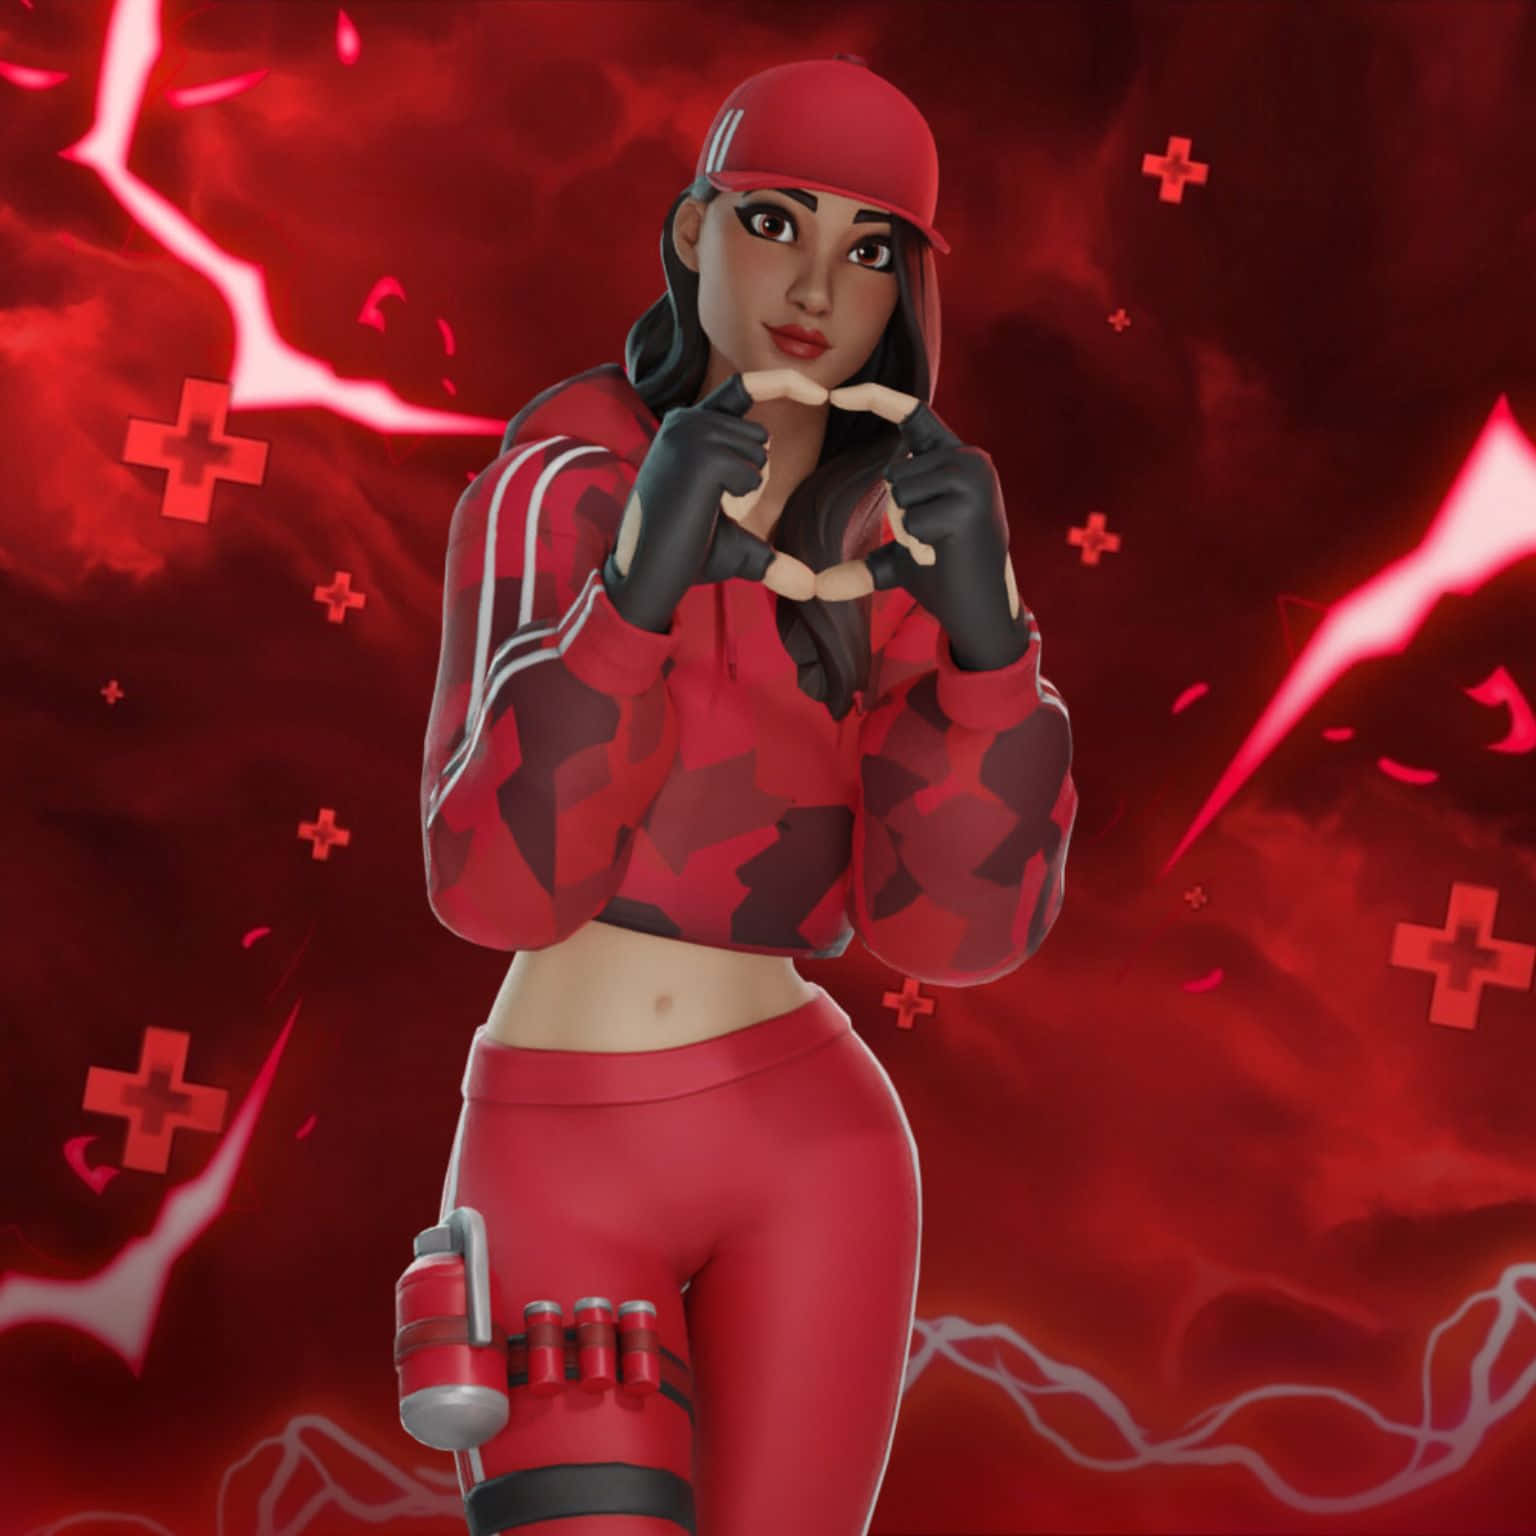 This Ruby Fortnite Skin is truly unique and stylish. Wallpaper